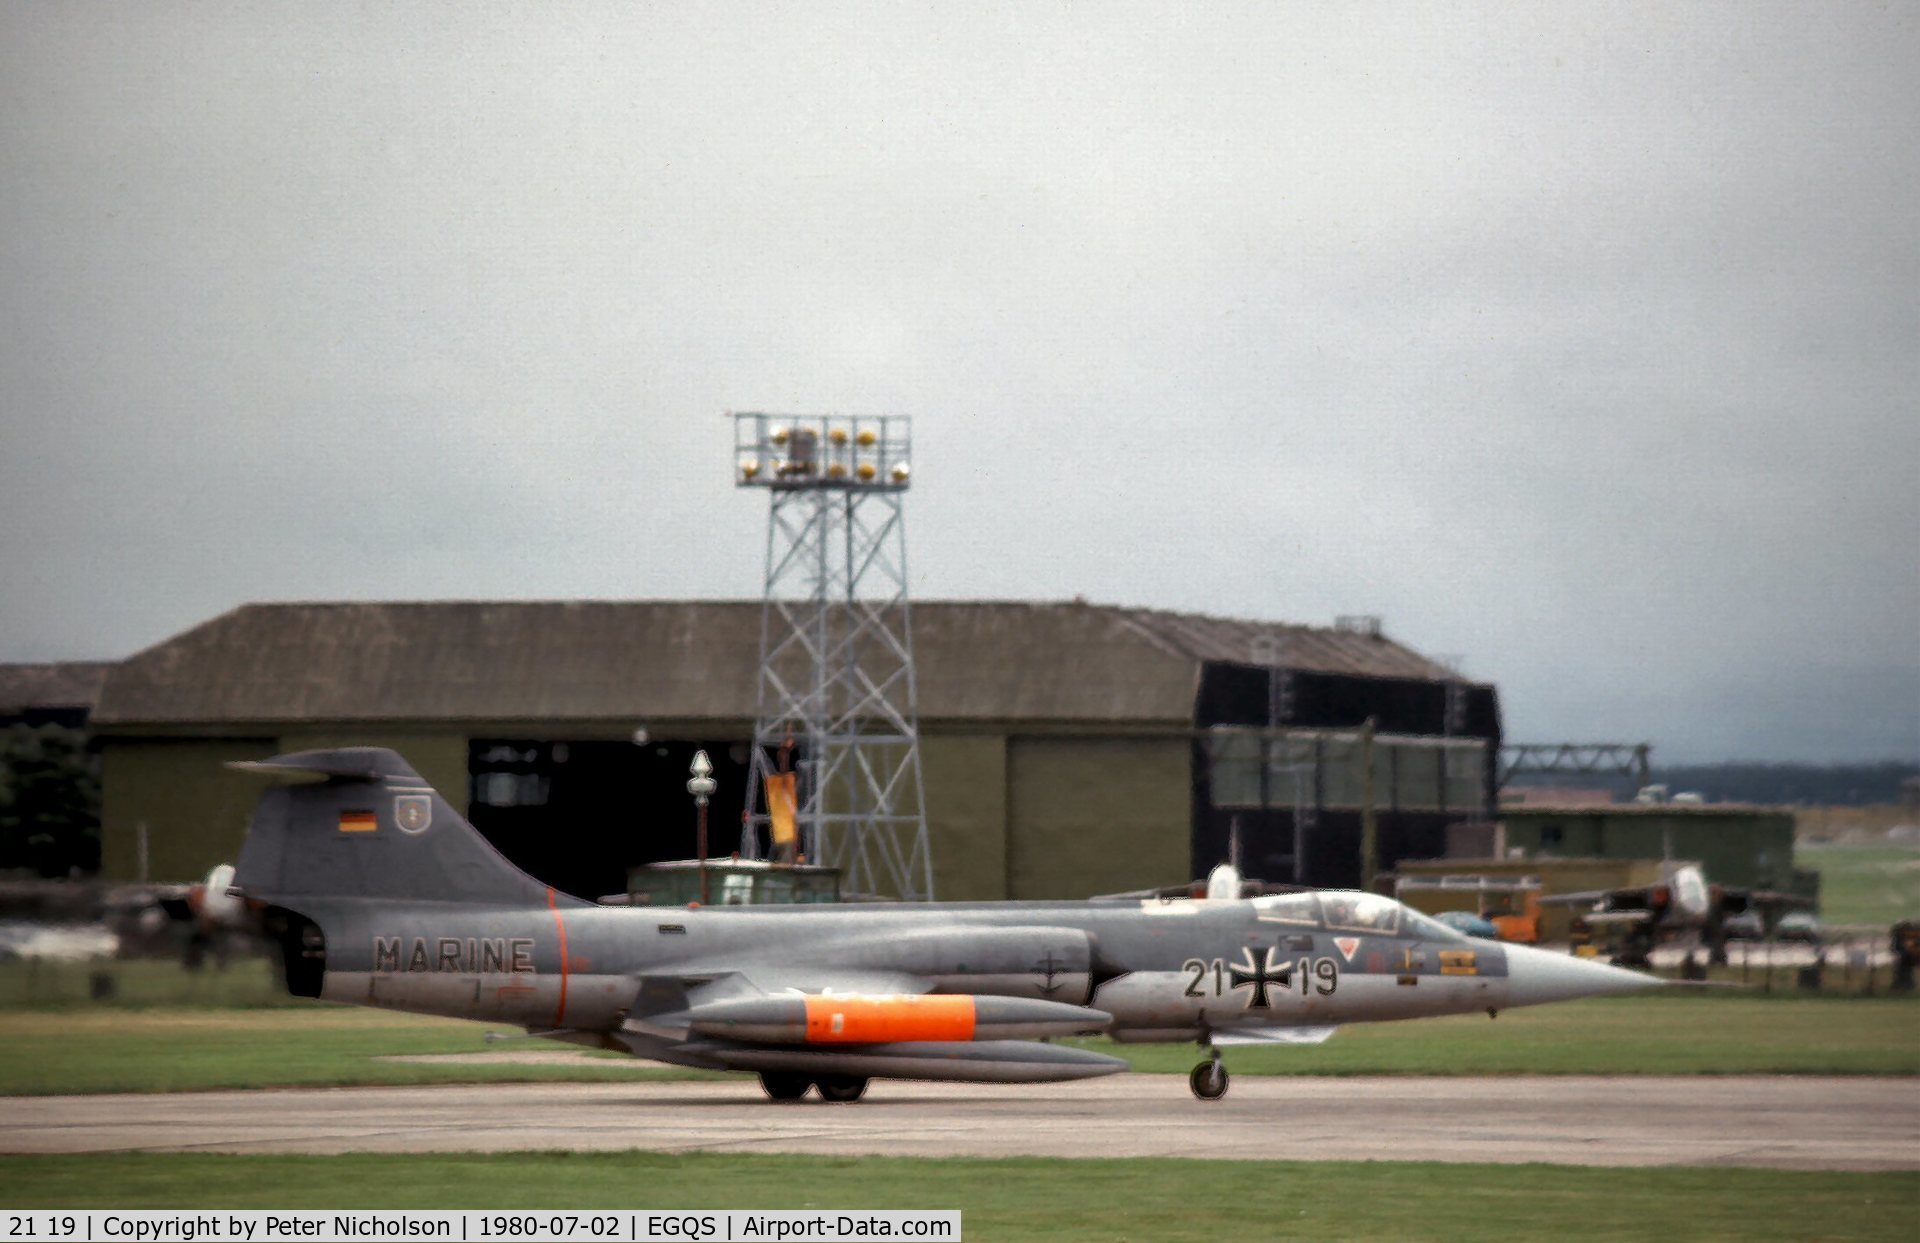 21 19, Lockheed F-104G Starfighter C/N 683-6674, F-104G Starfighter of MFG-2 awaiting clearance to join the active runway at RAF Lossiemouth in the Summer of 1980.